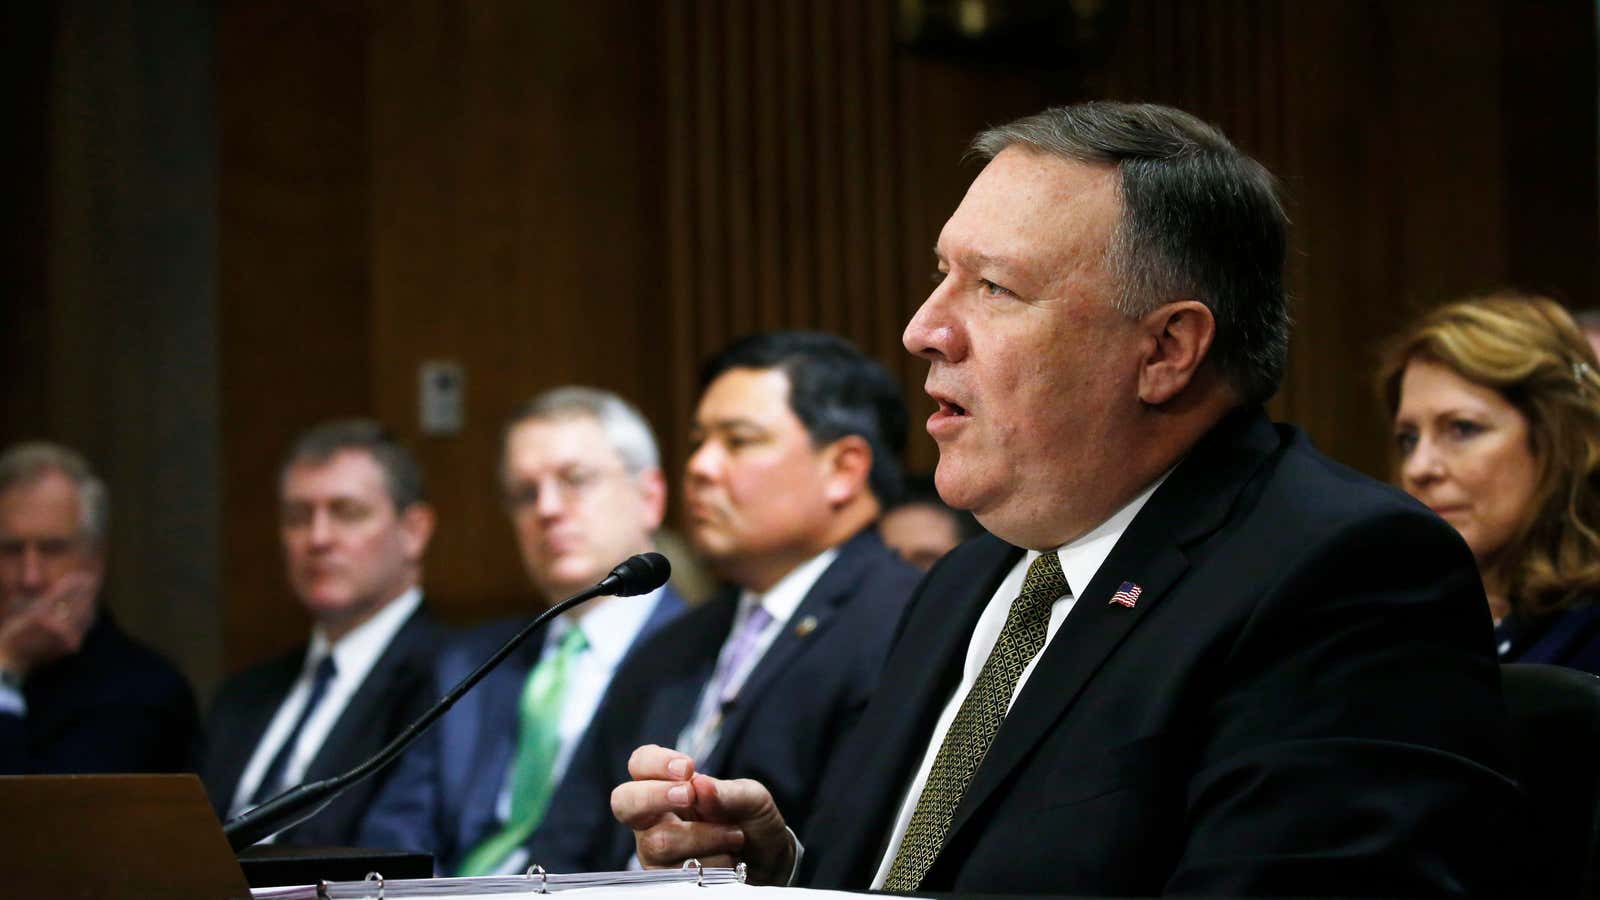 Pompeo wouldn’t say whether he believed gay sex is a “perversion.”